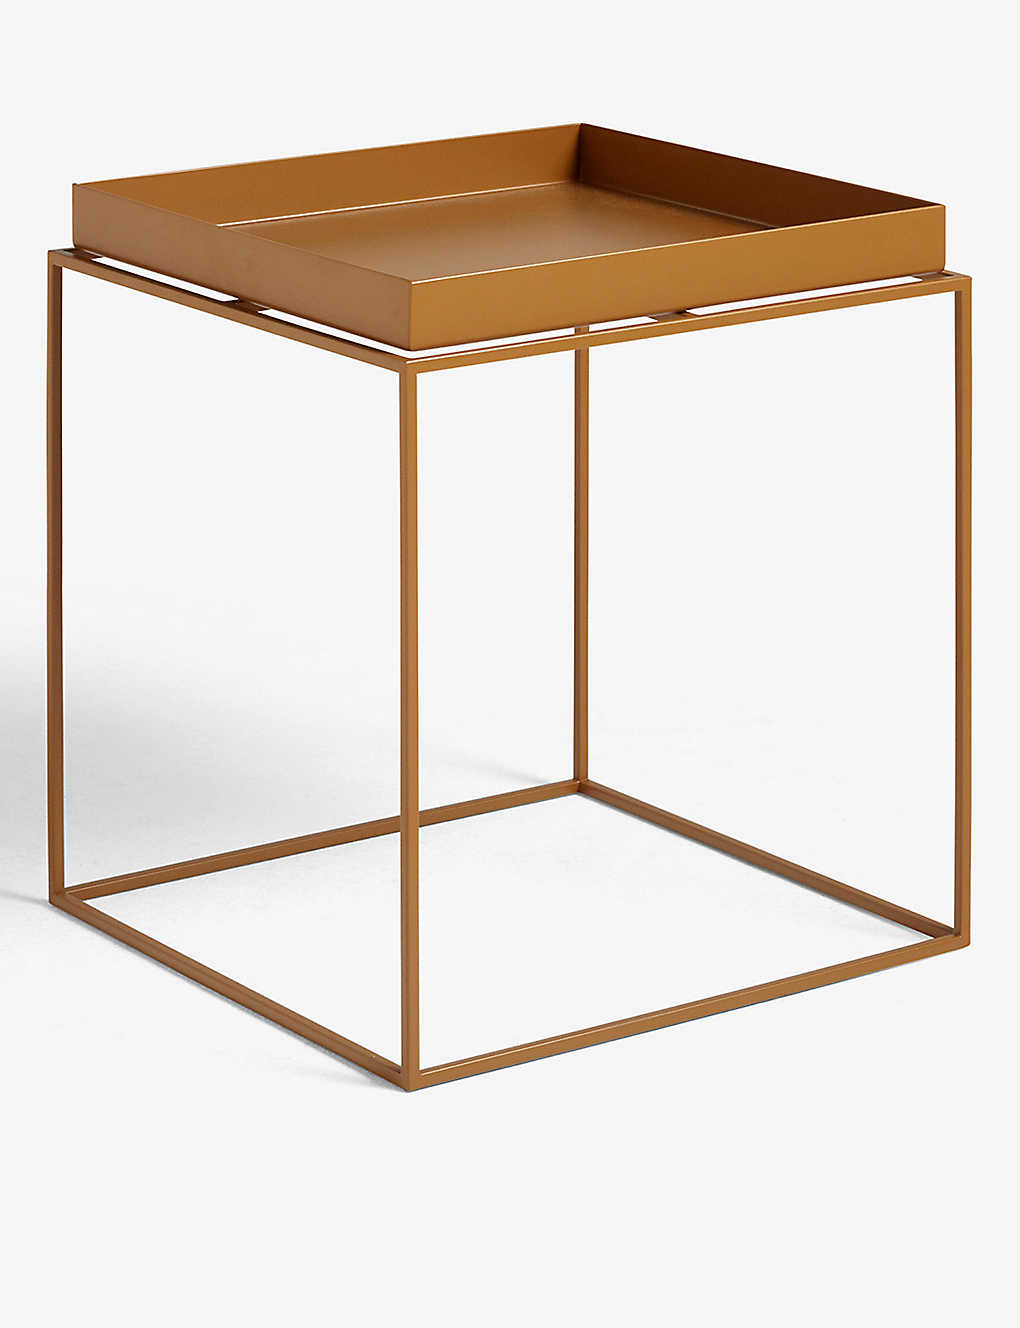 HAY リムーバブル スクエア スチール トレー テーブル 44cm Removable square steel tray table 44cm #BROWN